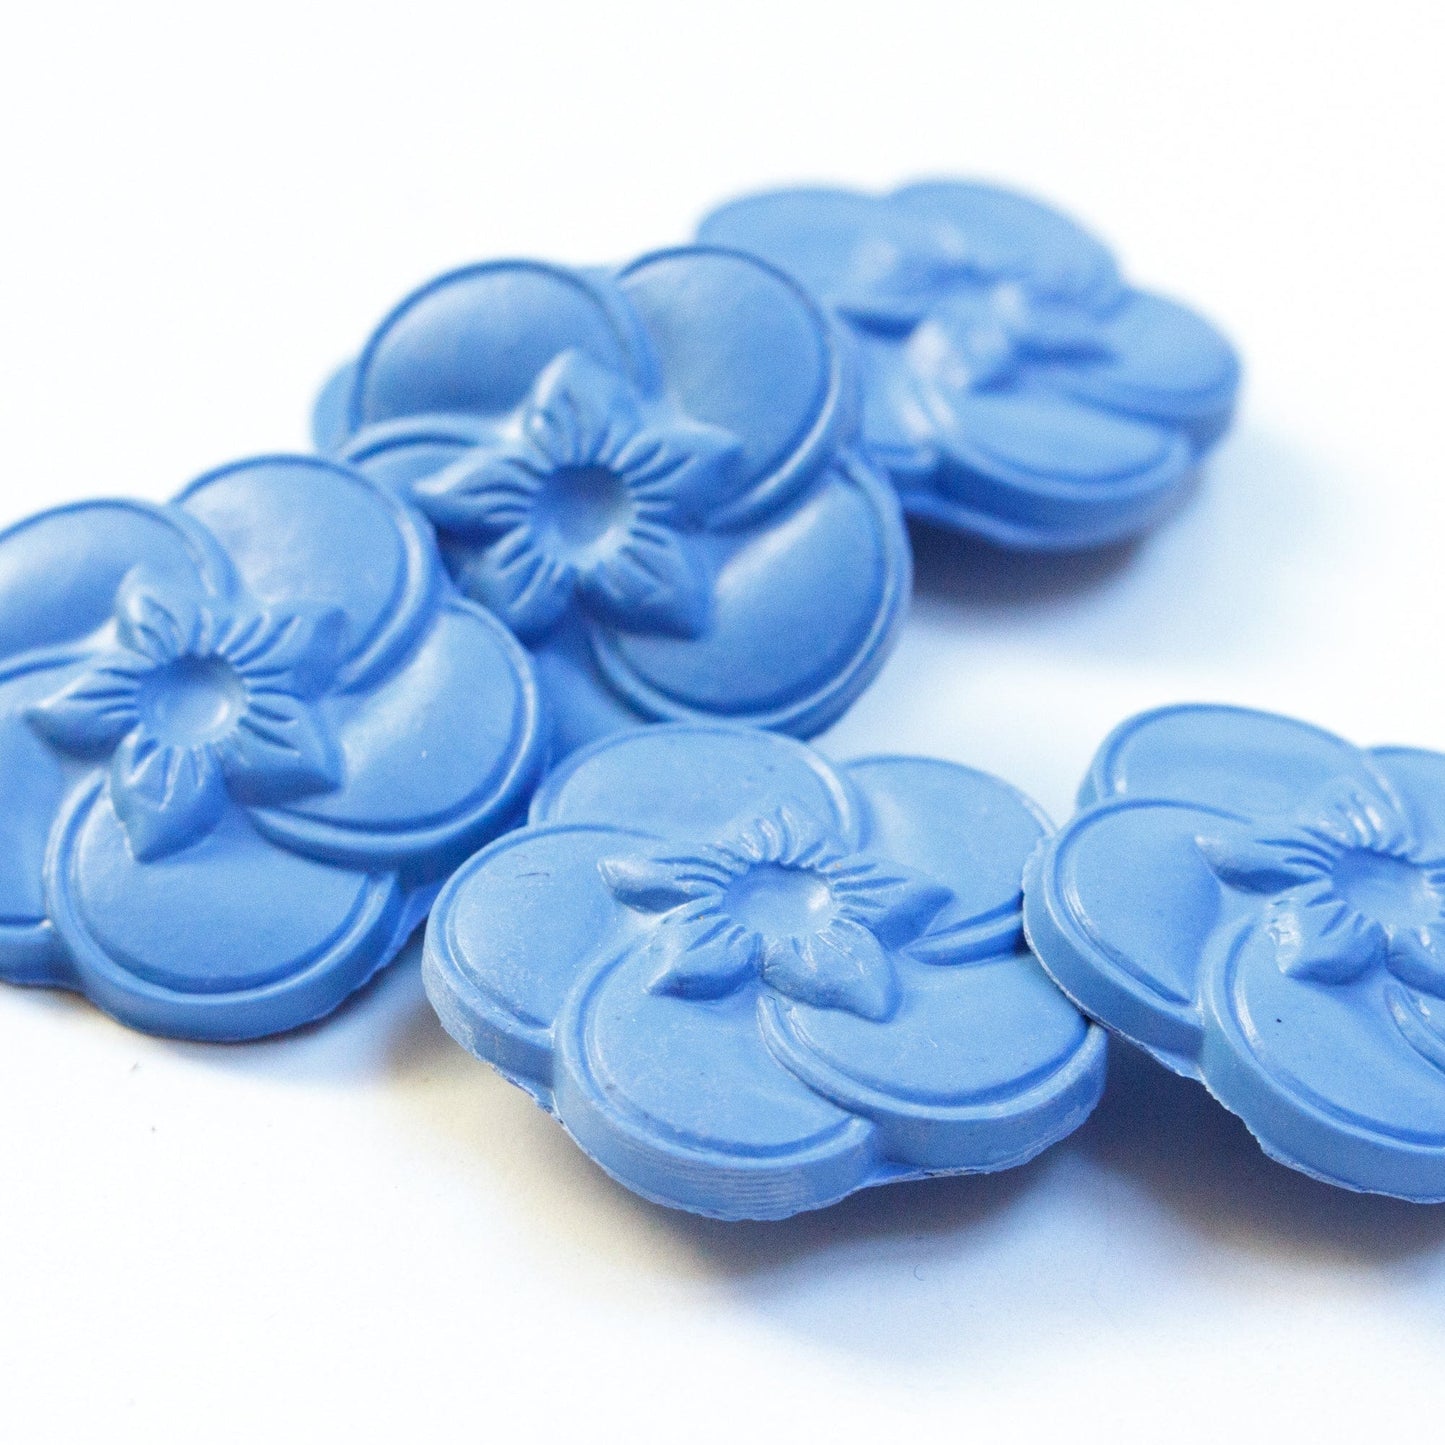 Vintage Plastic Flower Buttons in Periwinkle Blue, 22mm